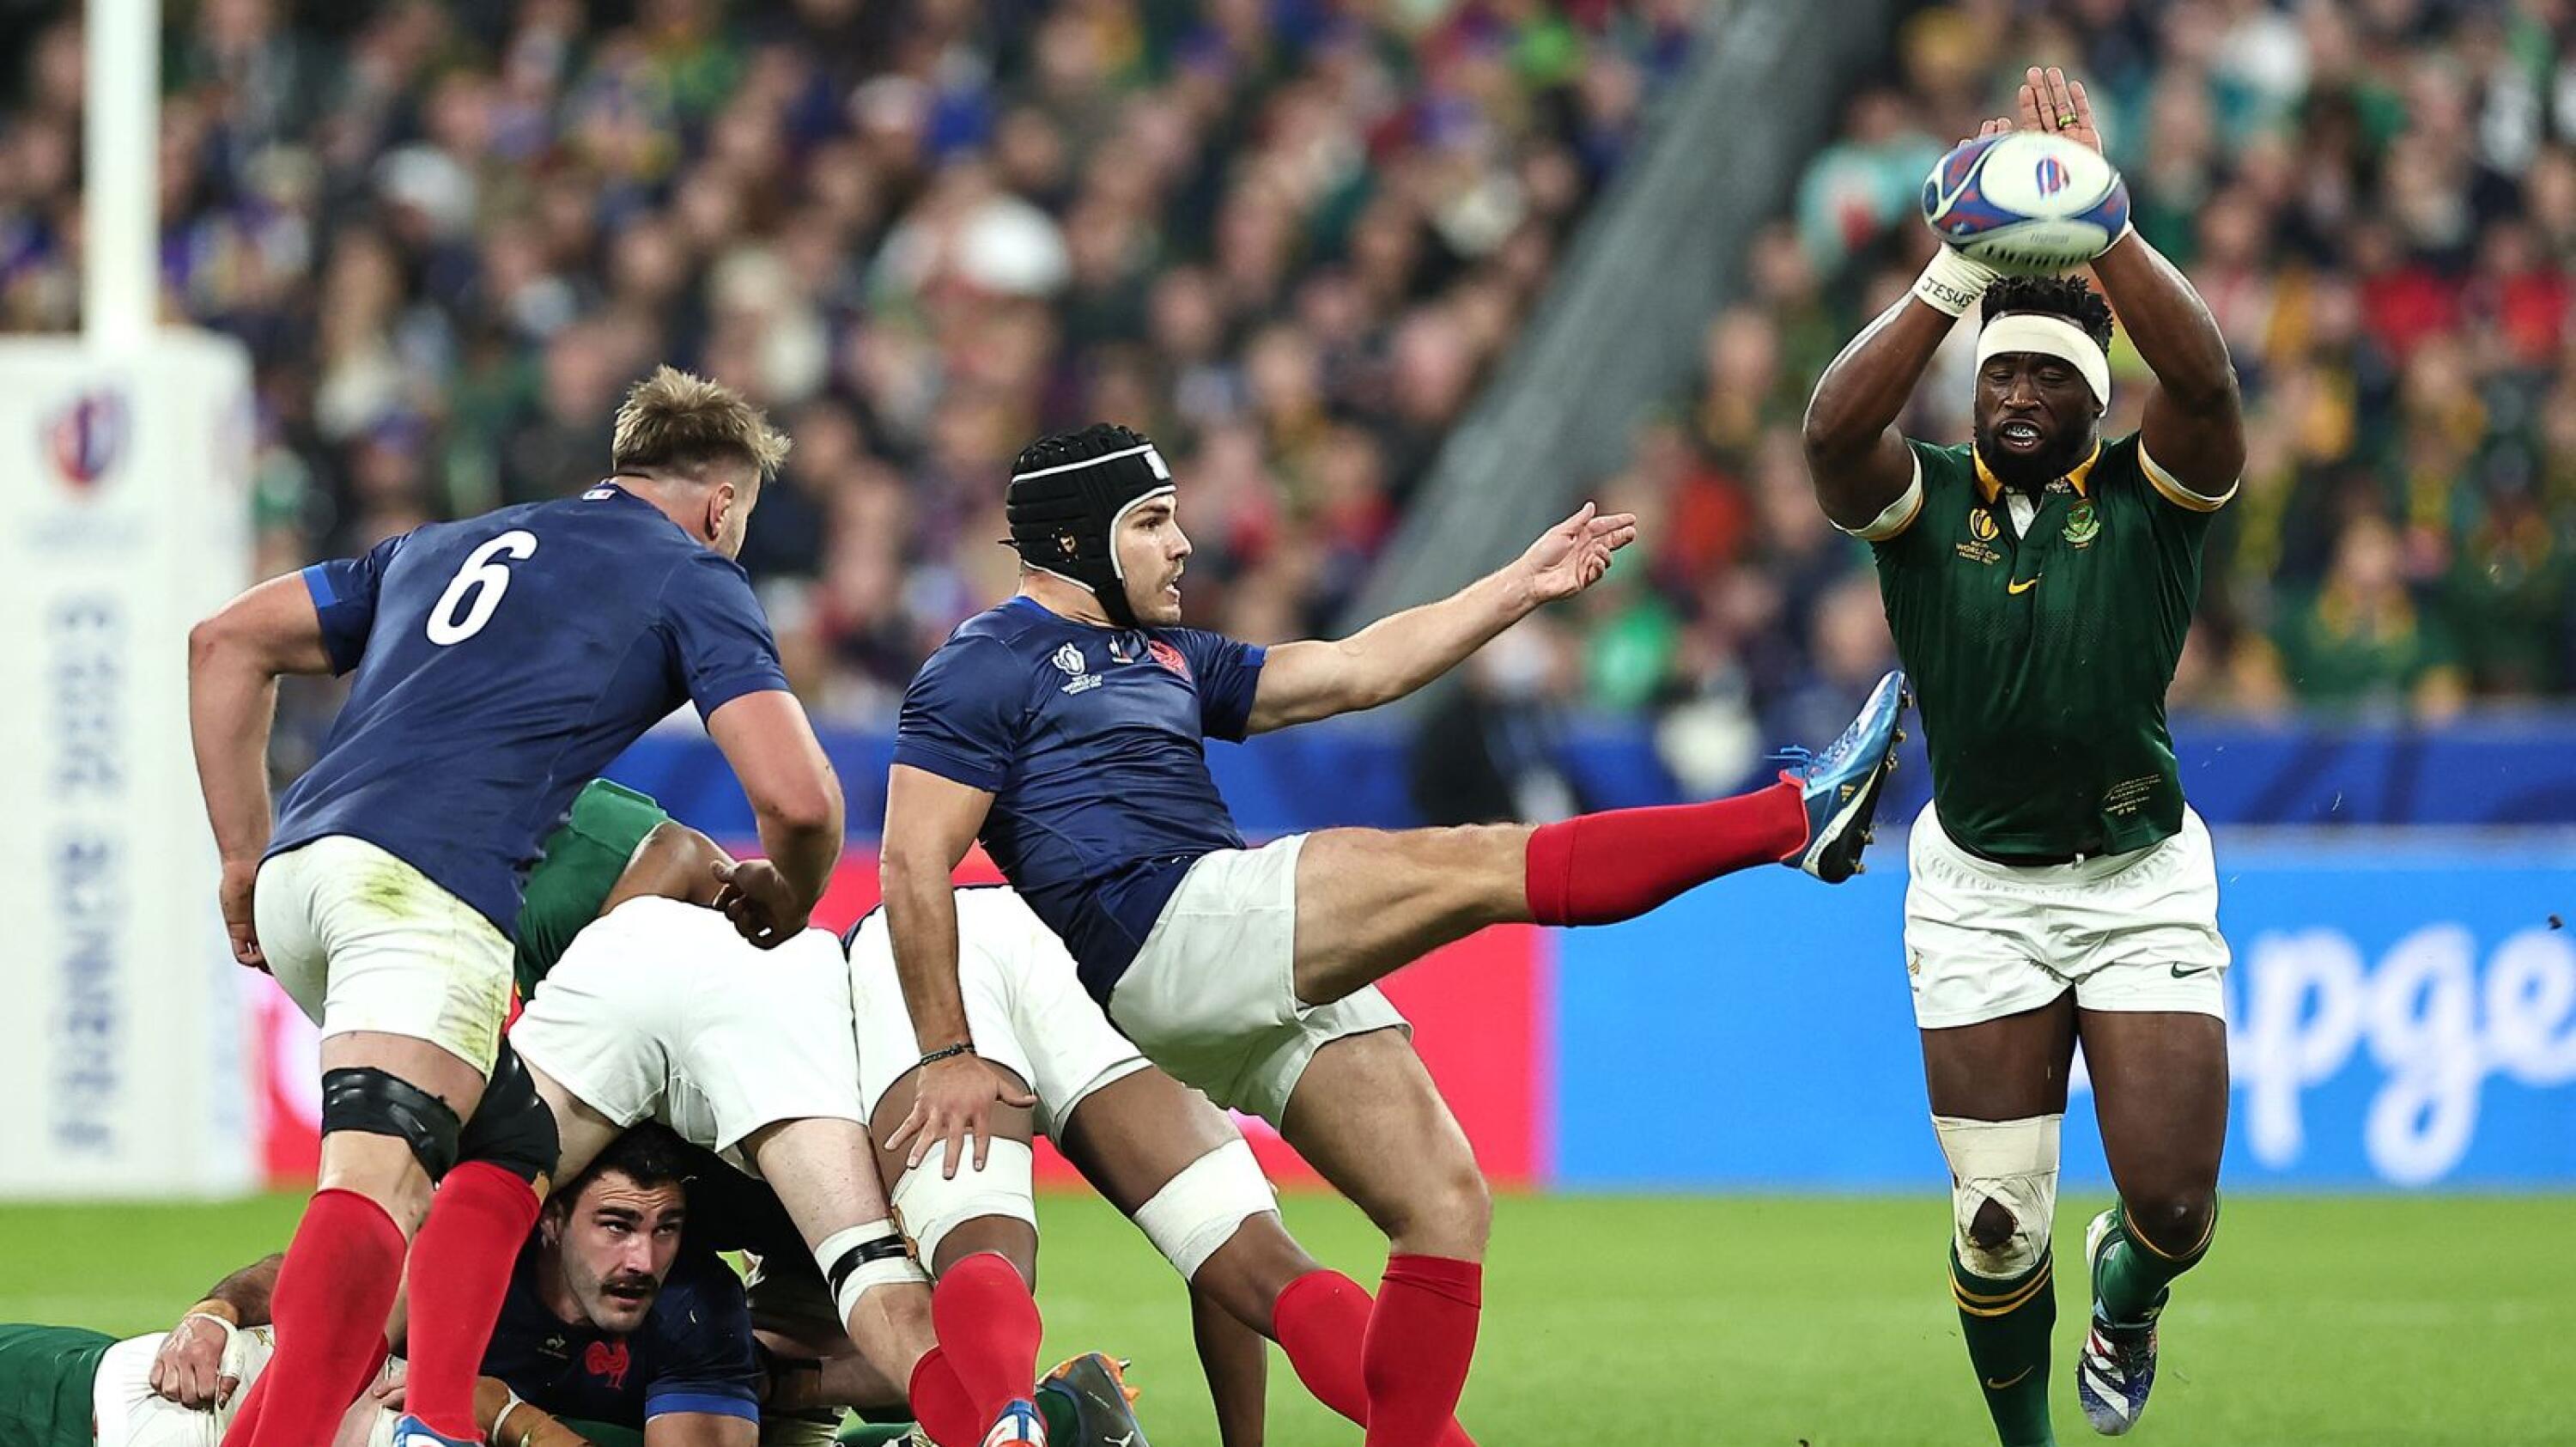 South Africa's Siya Kolisi attempts to charge down a kick from France's Antoine Dupont during their Rugby World Cup quarter-final at the Stade de France